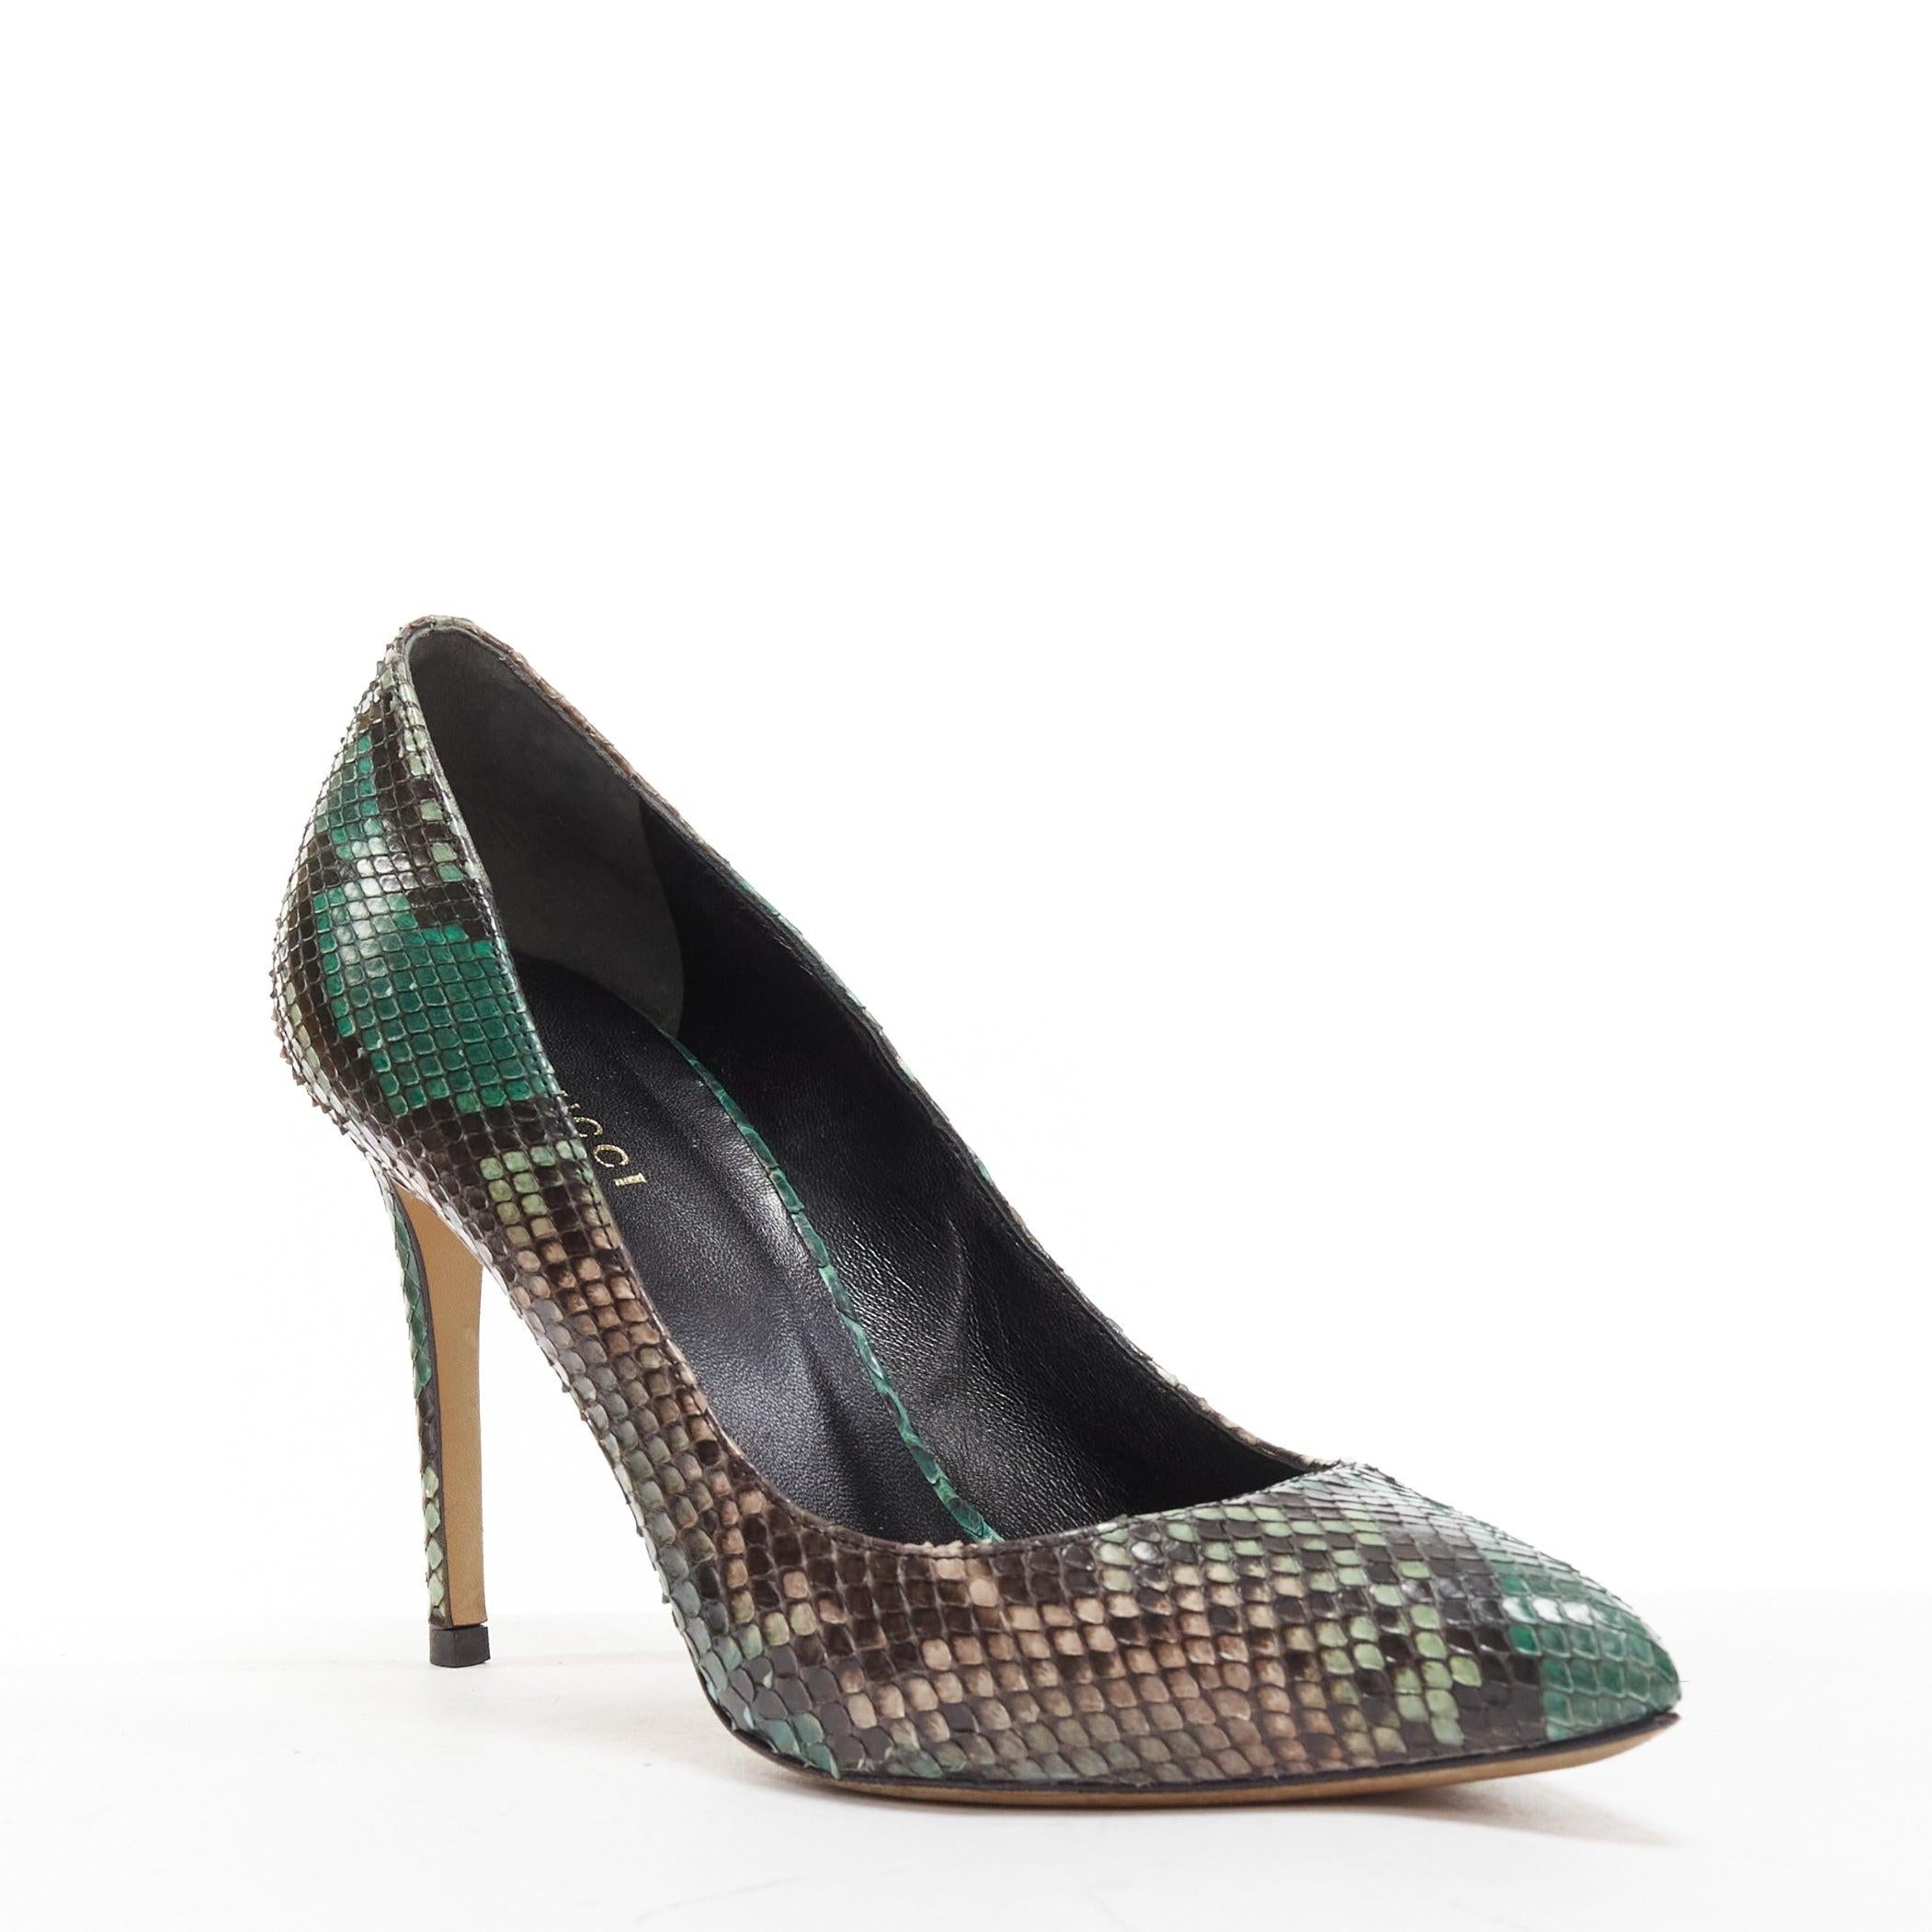 GUCCI Exclusive green brown scaled leather classic heel pumps EU38
Reference: MEKK/A00004
Brand: Gucci
Collection: Europe Exclusive
Material: Leather
Color: Green, Brown
Pattern: Animal Print
Closure: Slip On
Lining: Black Leather
Made in: